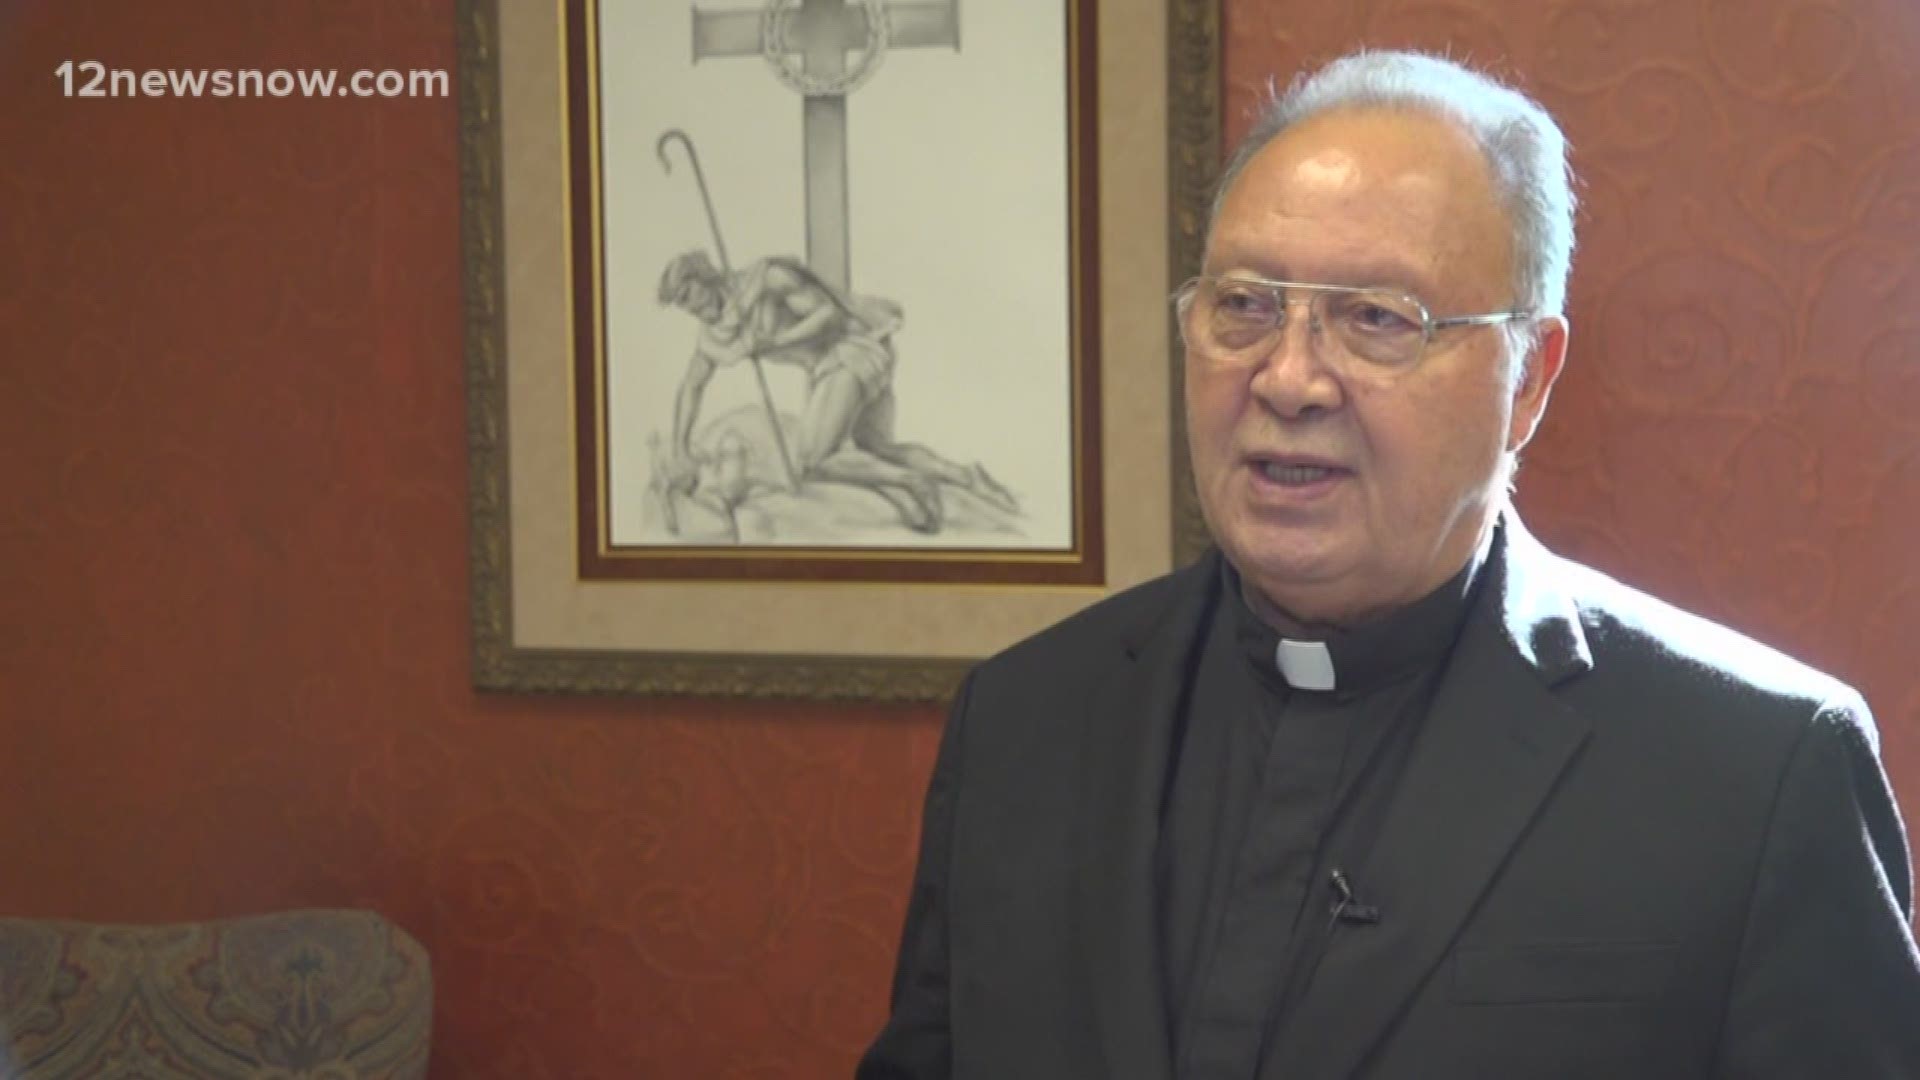 Bishop Guillory says the decision was a difficult one